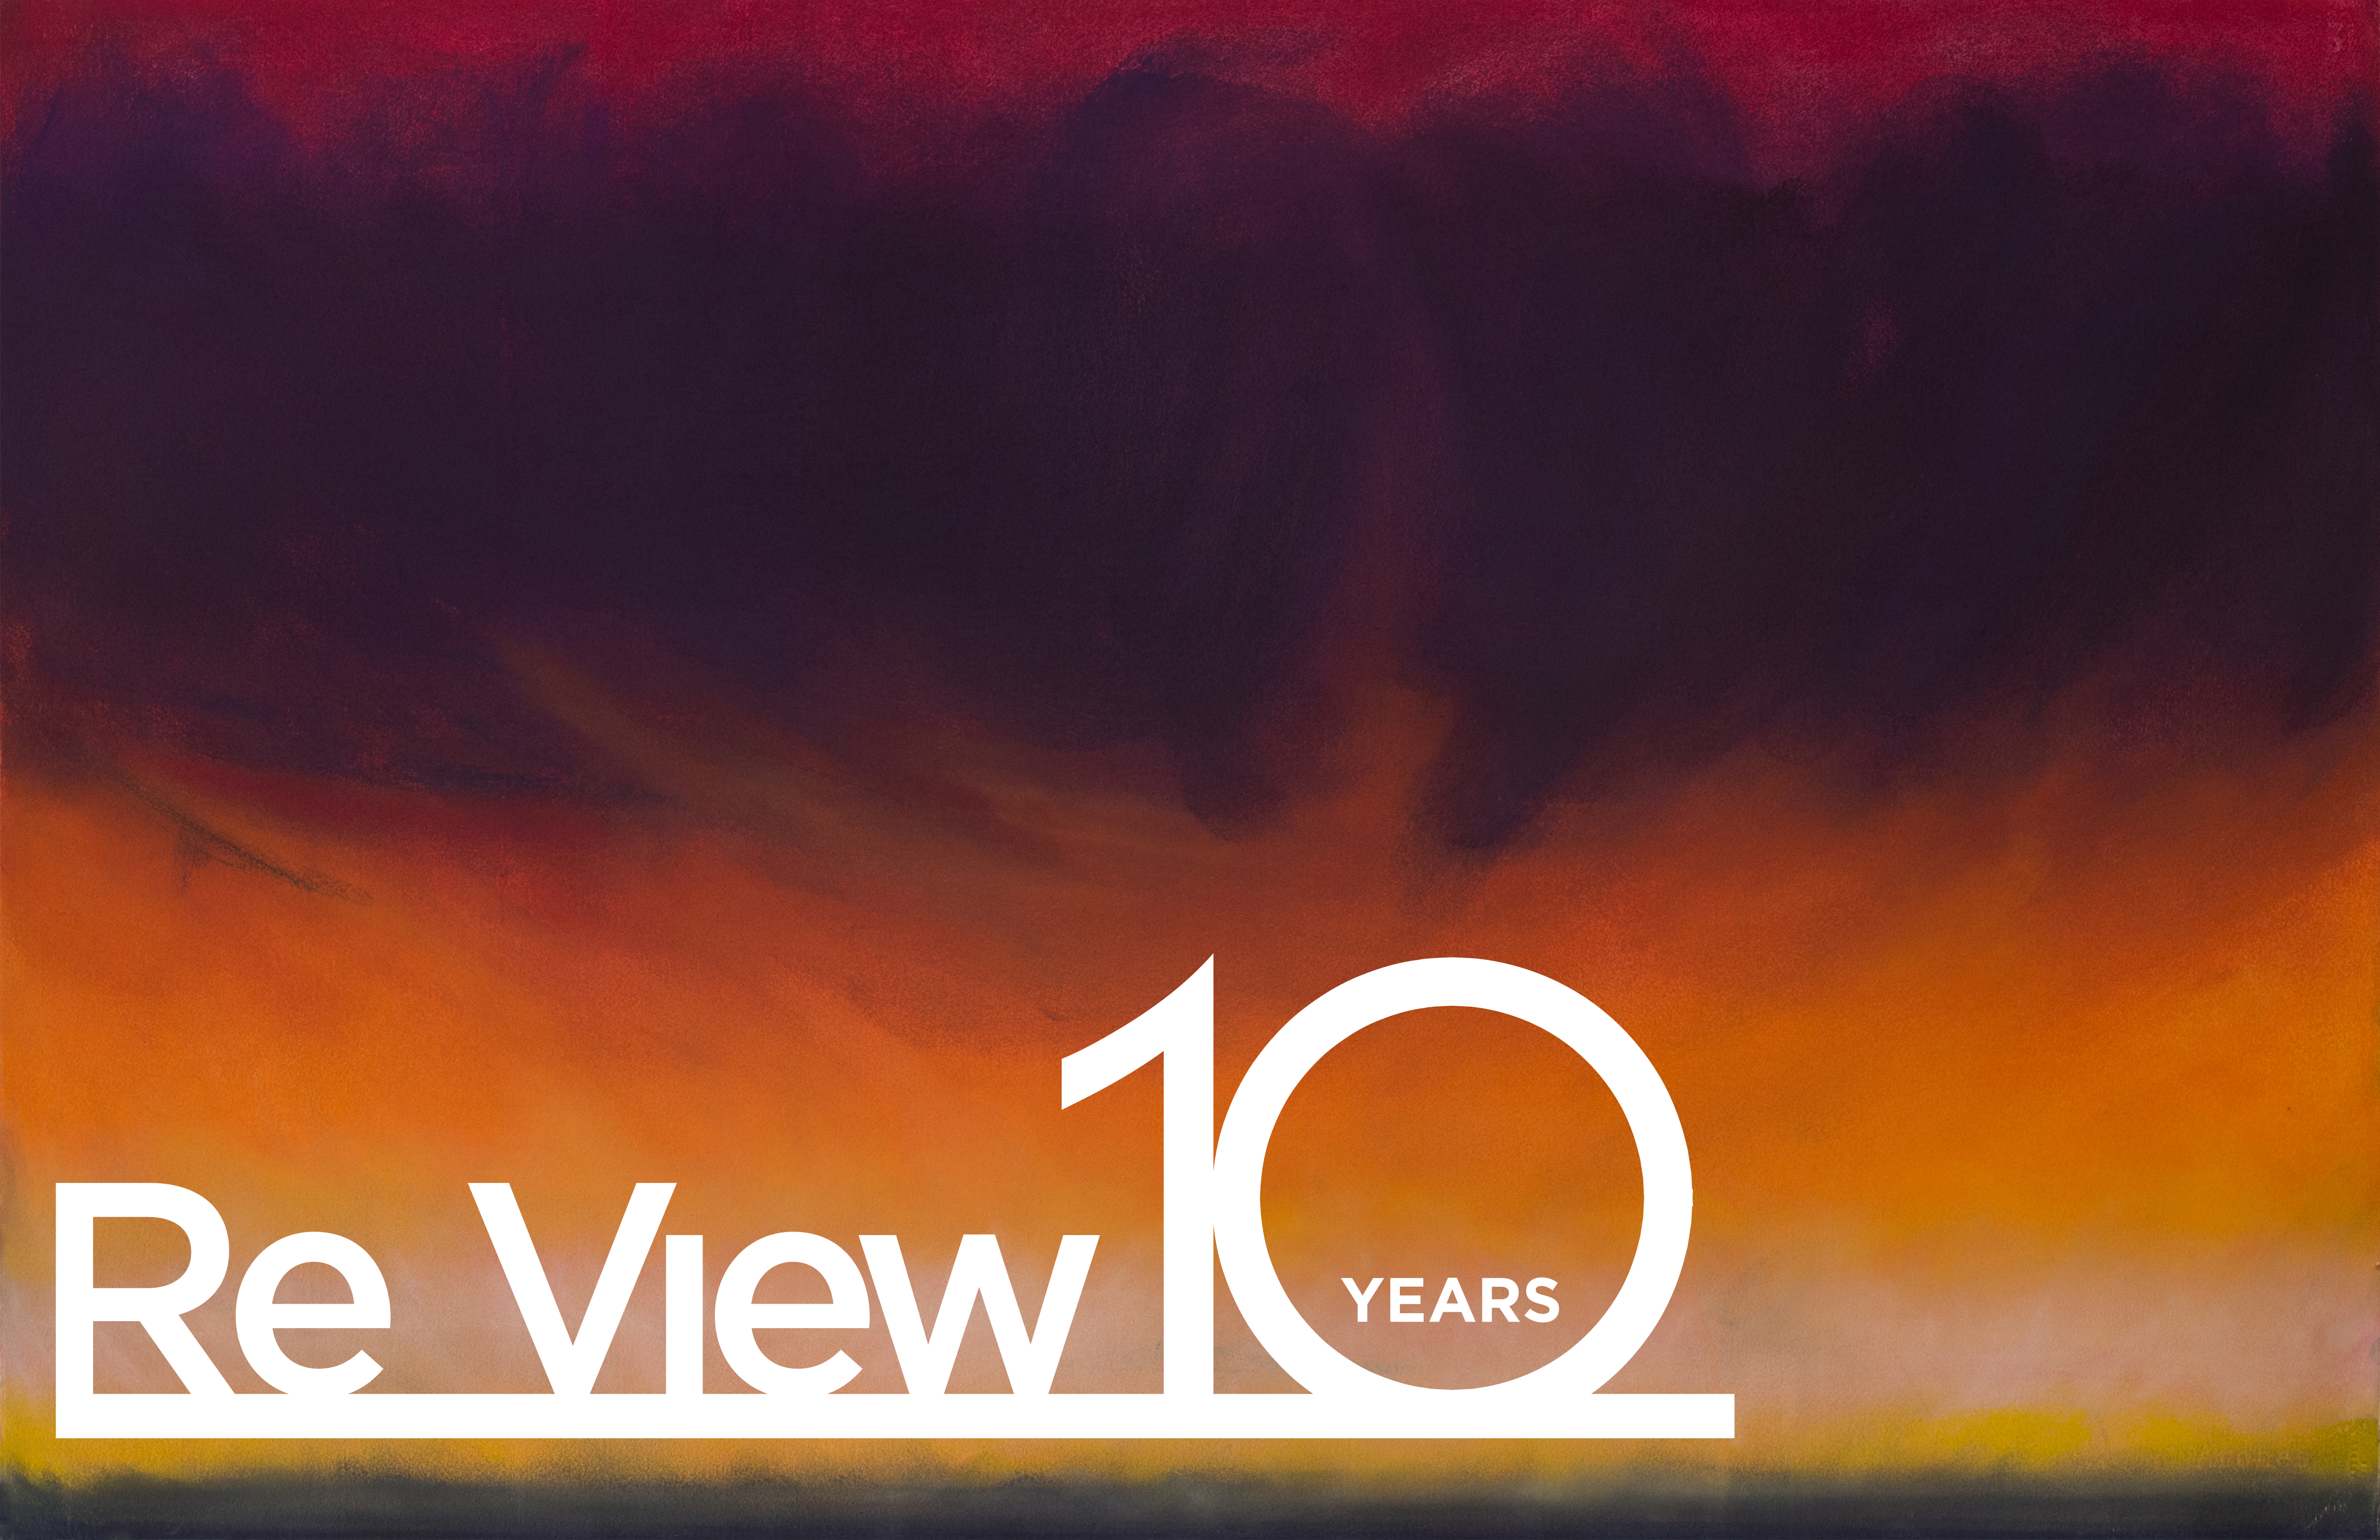 Image with Re View 10 Logo over top